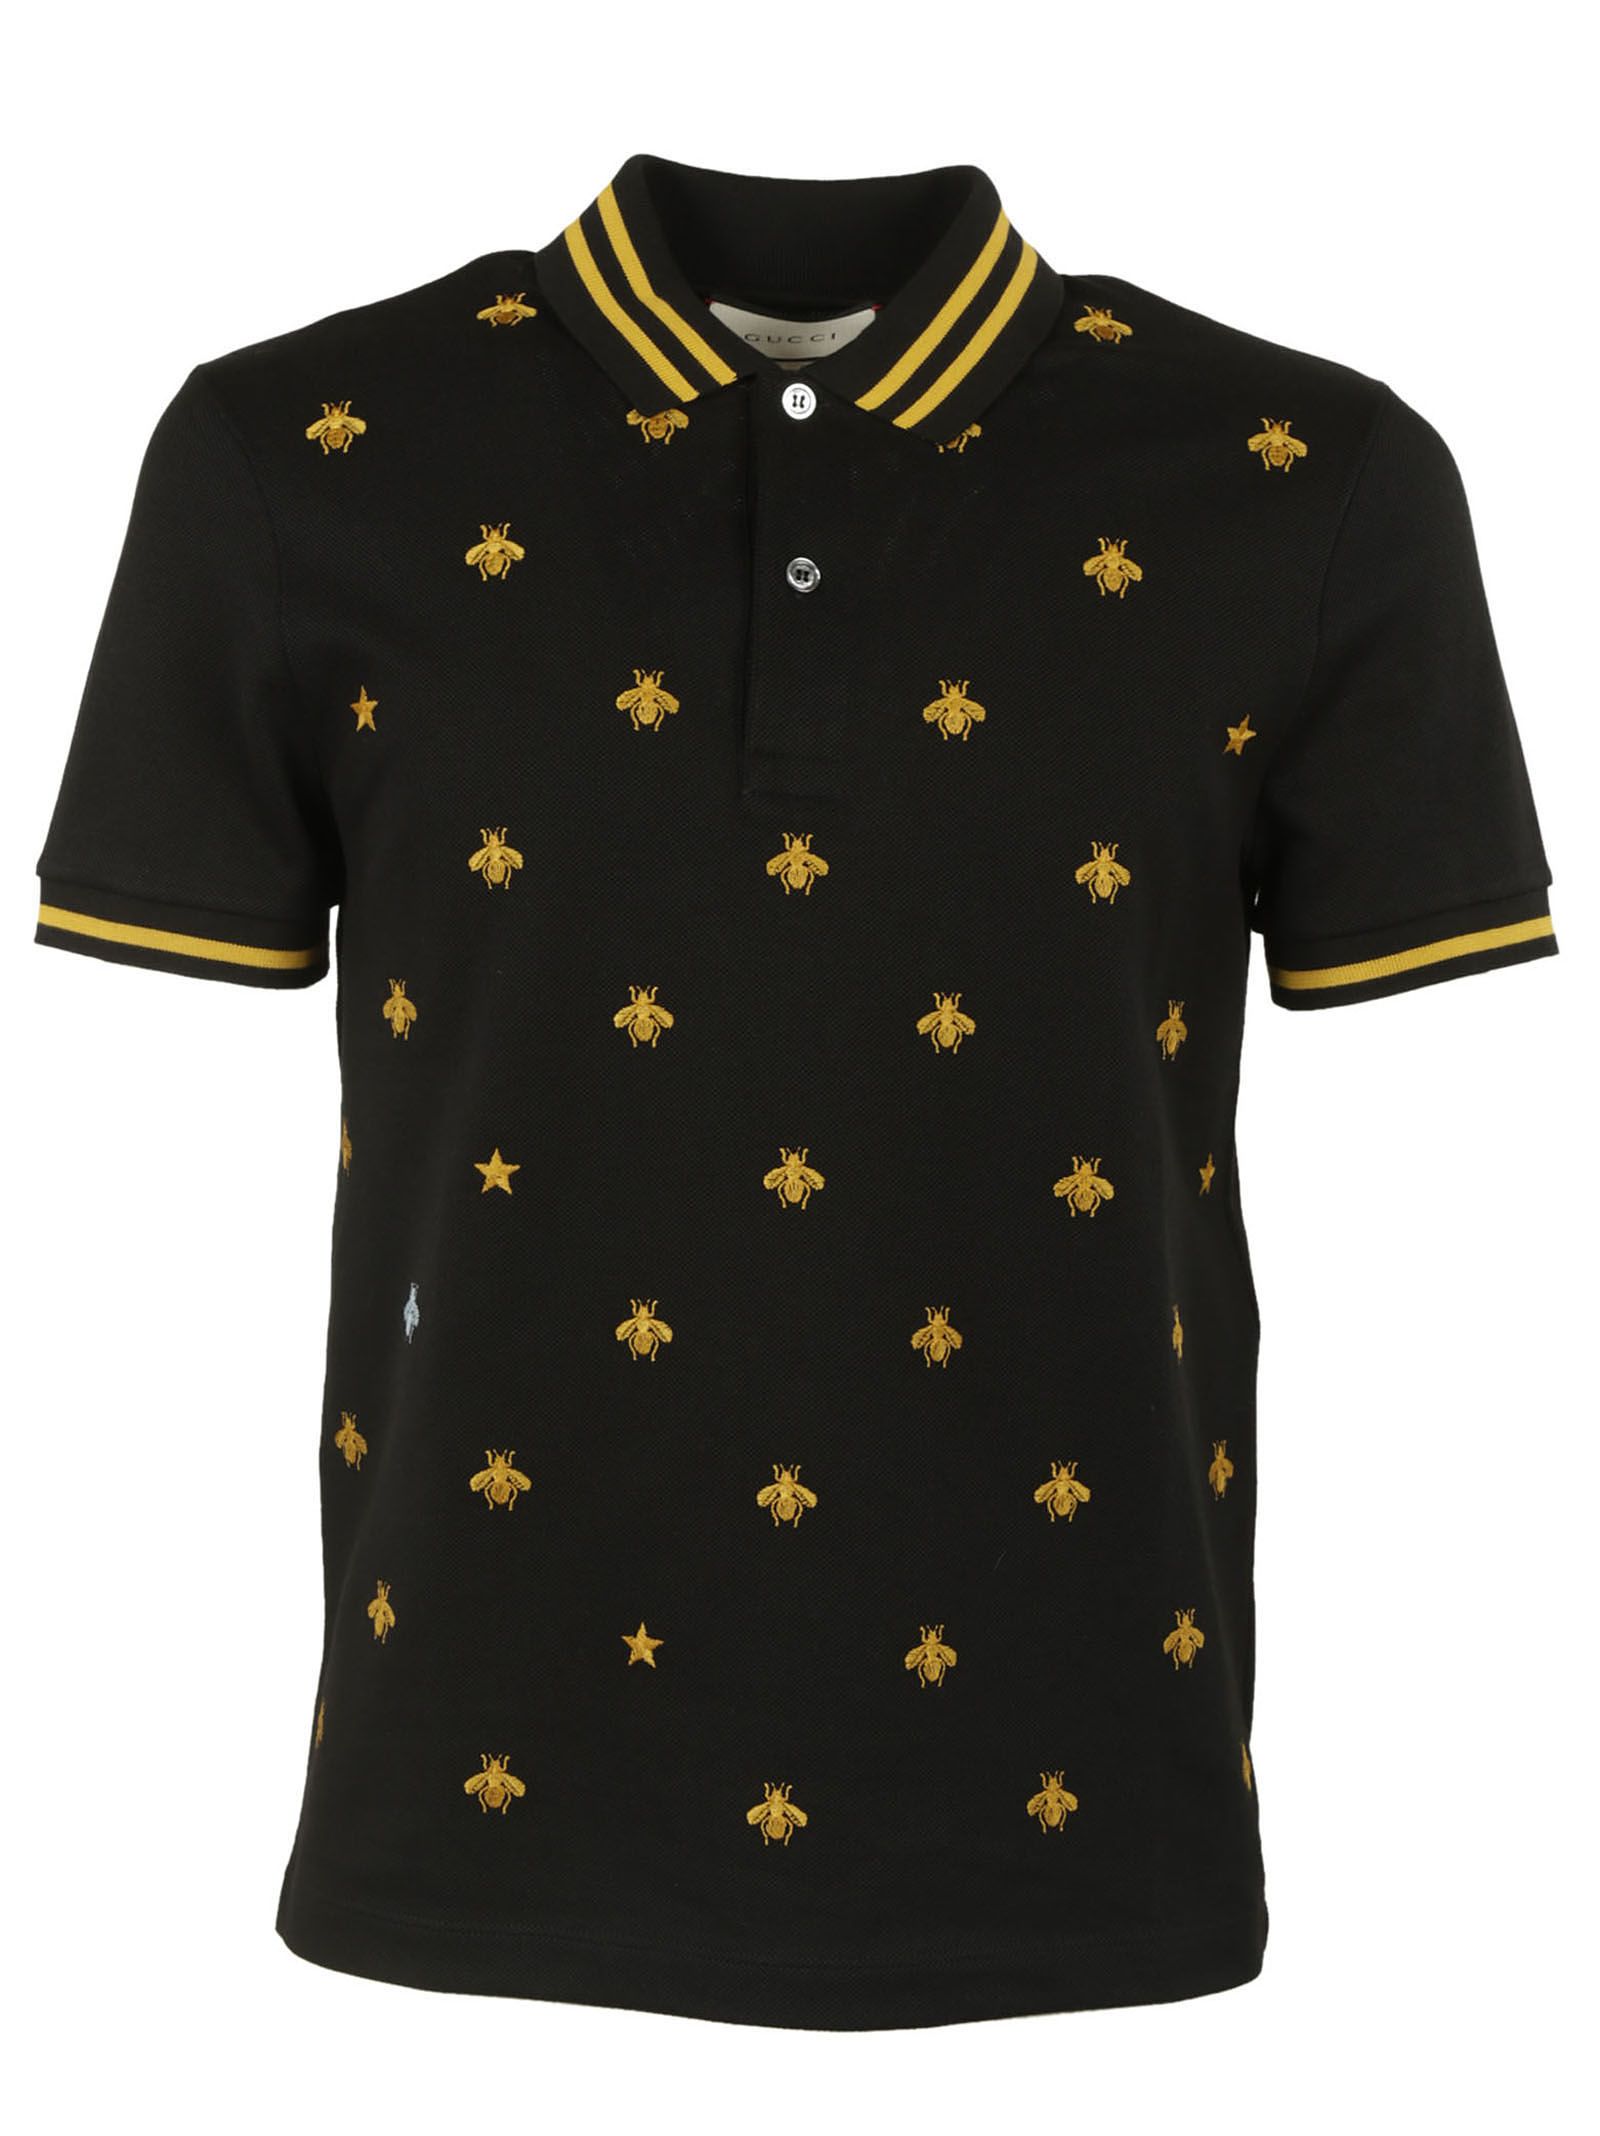 Gucci - Gucci Cotton with Bees Polo Shirt - Black, Men's Polo Shirts | Italist